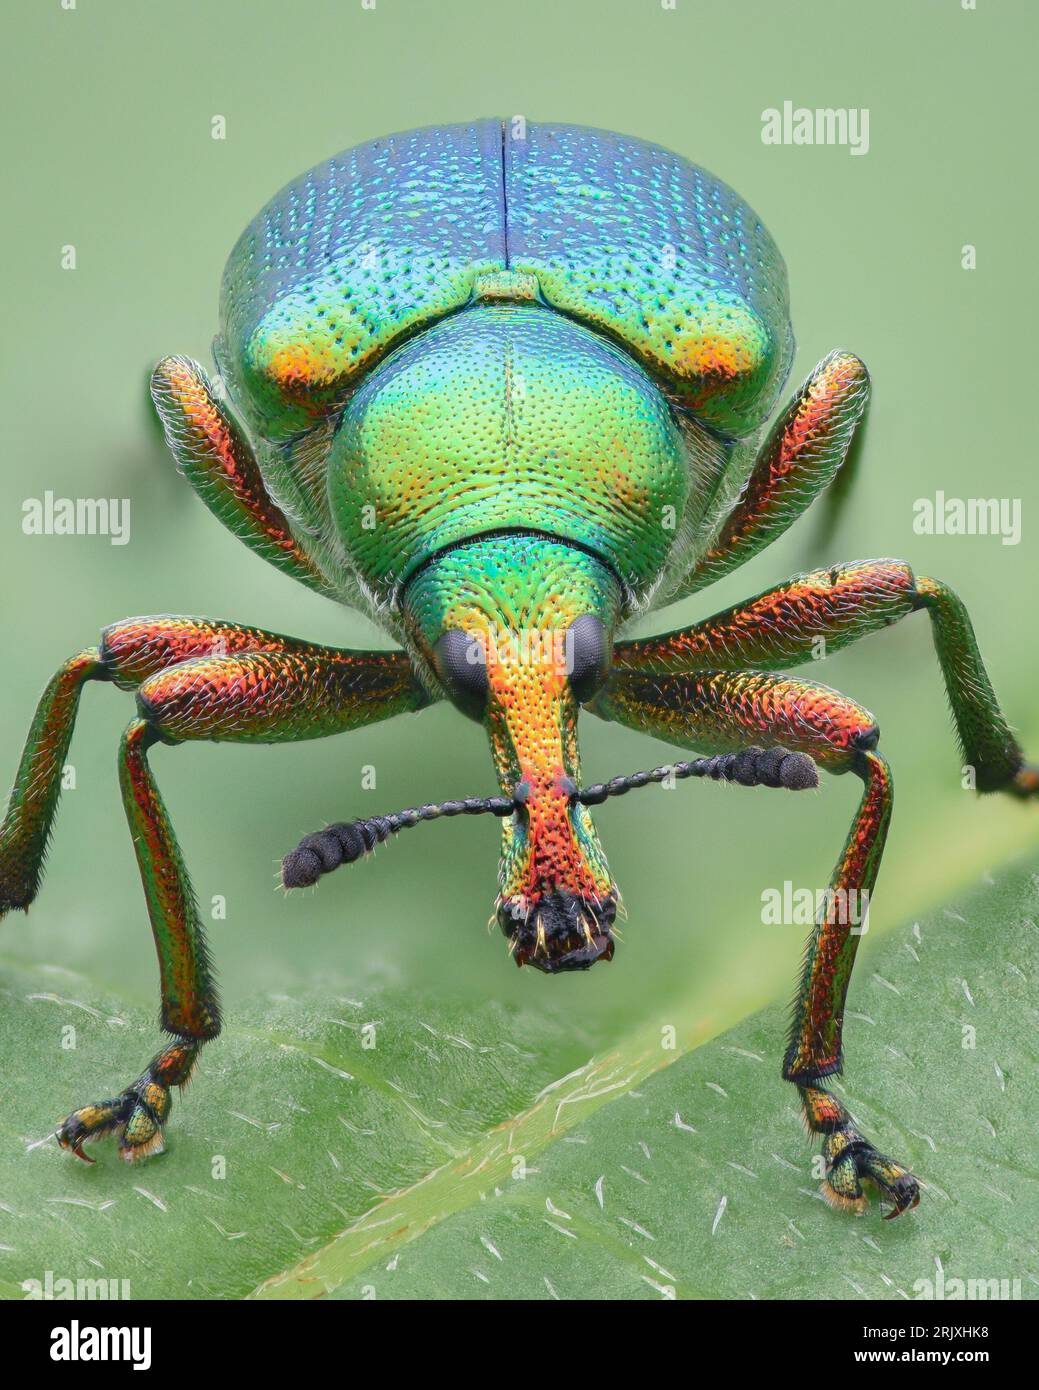 Portrait of a multicolored, iridescent leaf-rolling weevil (a type of beetle) with blue, green, and red colors, standing on a leaf (Byctiscus betulae) Stock Photo